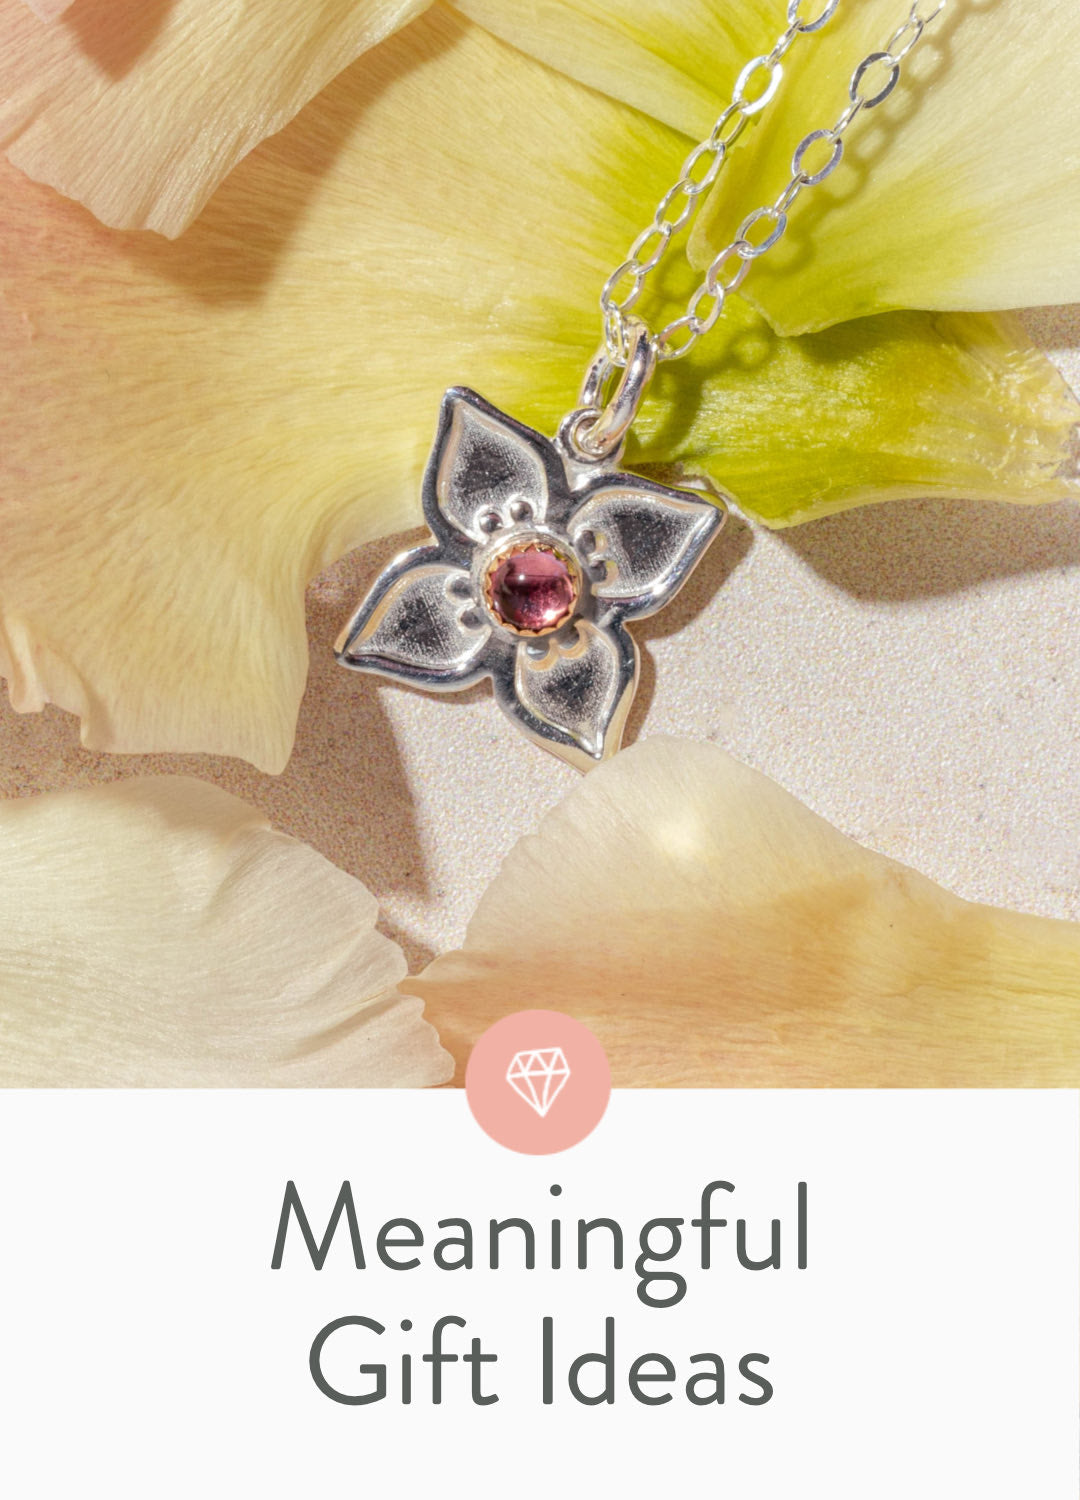 Meaningful gift ideas: silver and gold jewellery gifts for women